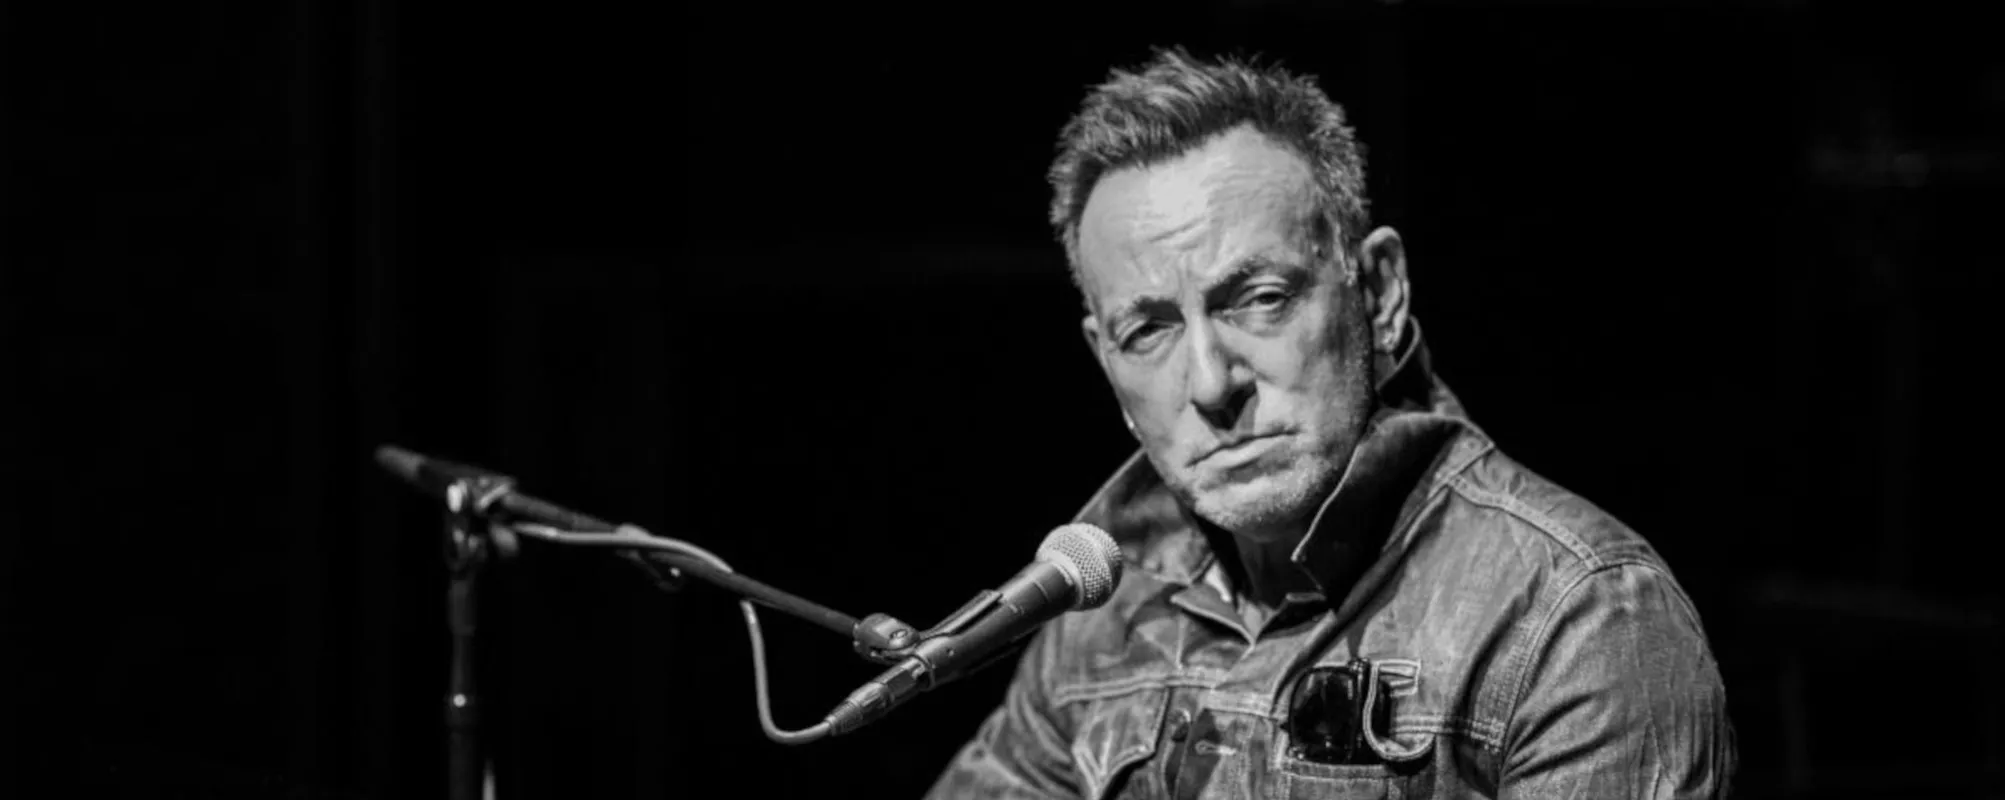 ‘Springsteen On Broadway’ Returns for a Limited Run this Summer